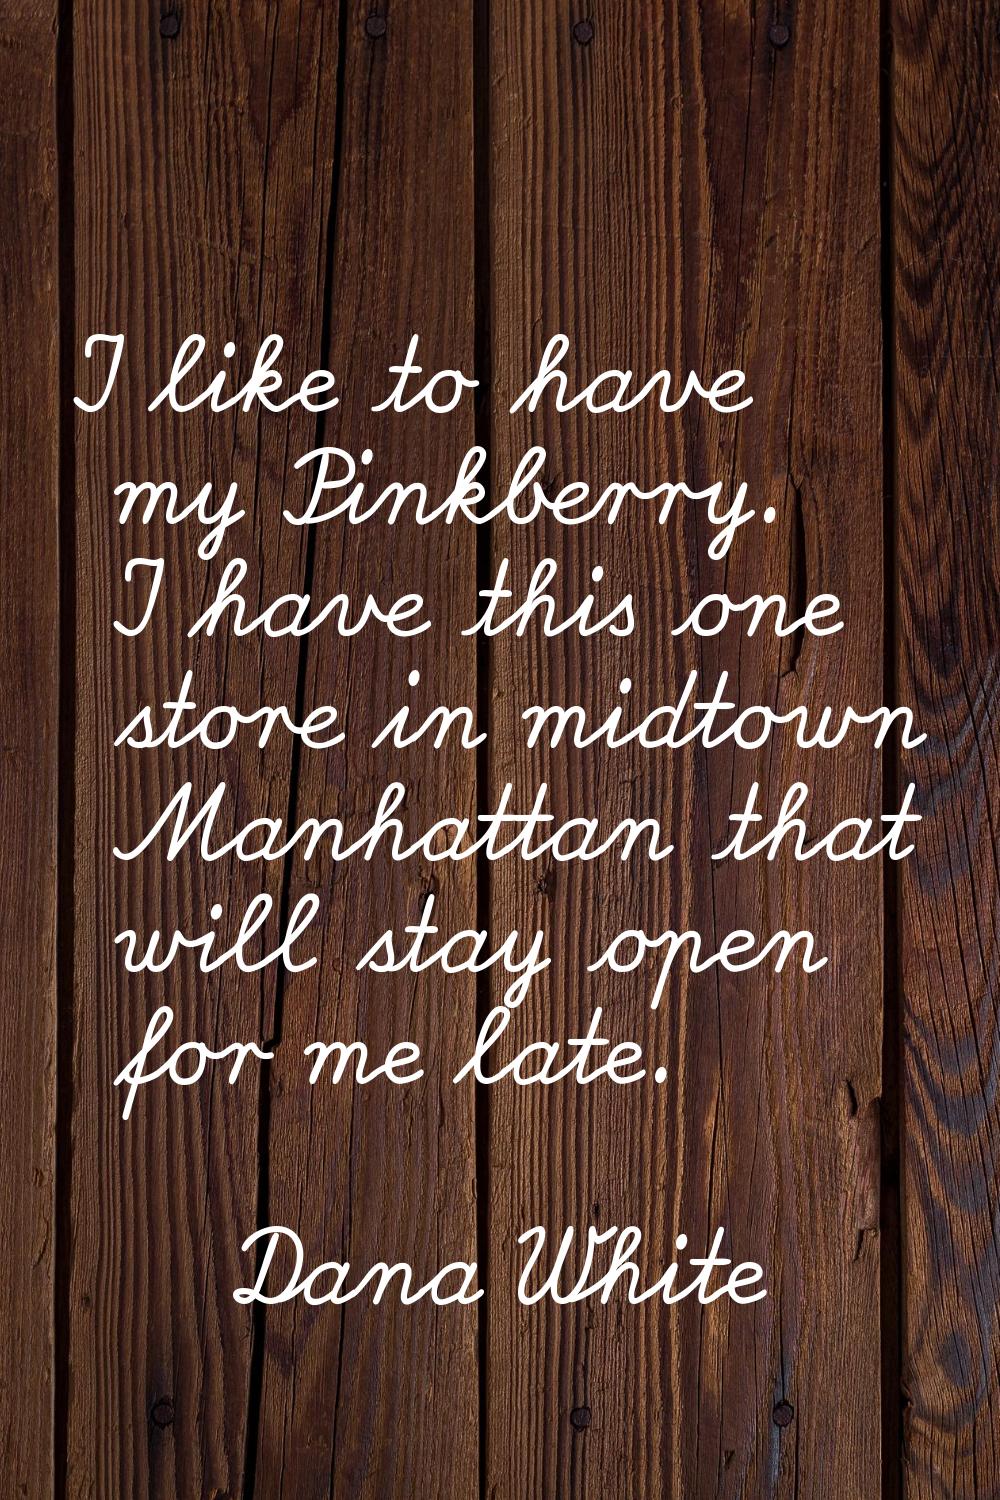 I like to have my Pinkberry. I have this one store in midtown Manhattan that will stay open for me 